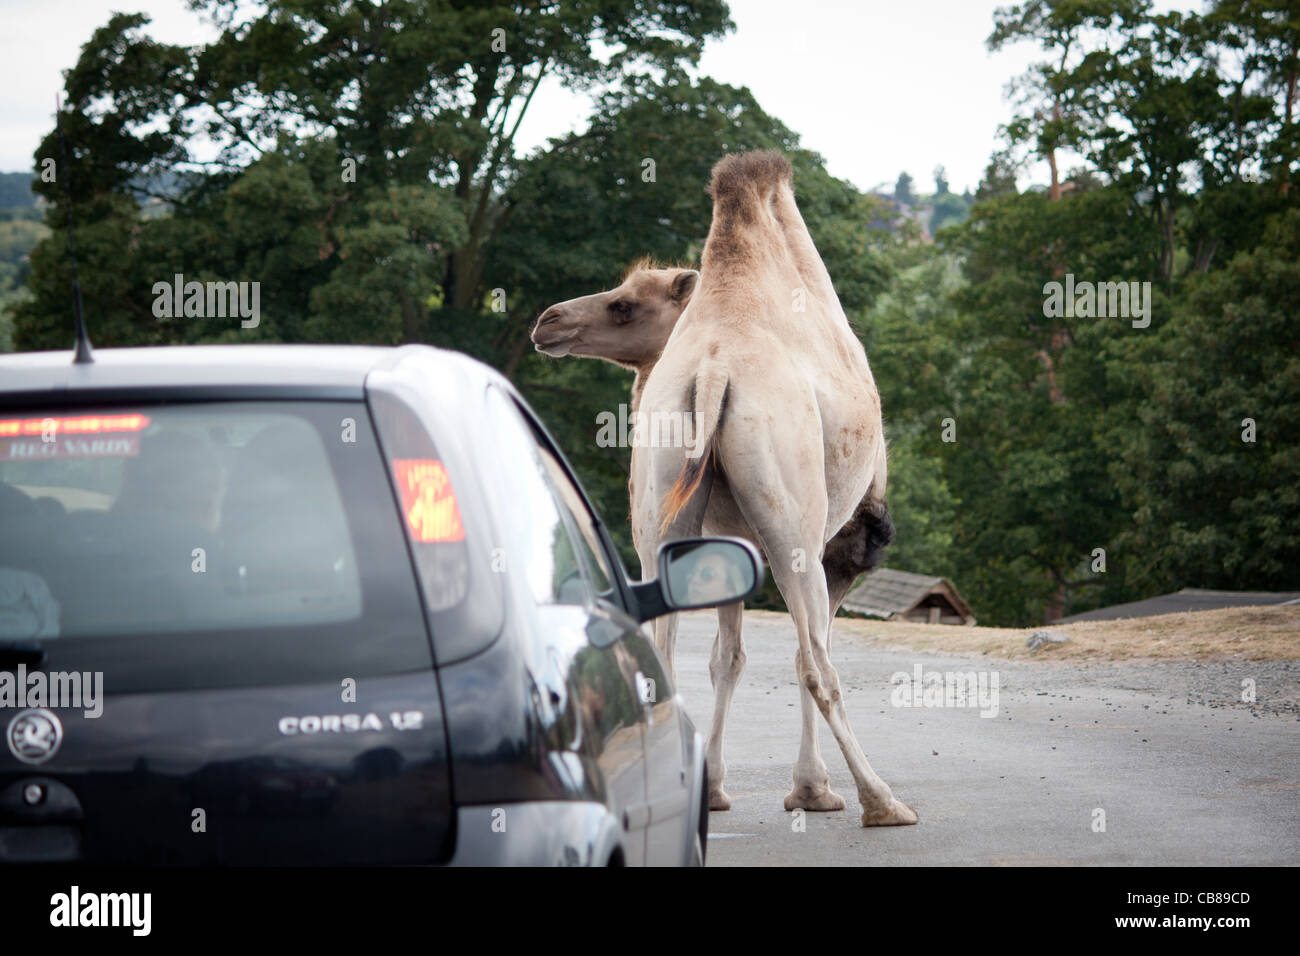 A camel stopping traffic in front of a car, a zoo animal walking away freely at a safari park. Stock Photo